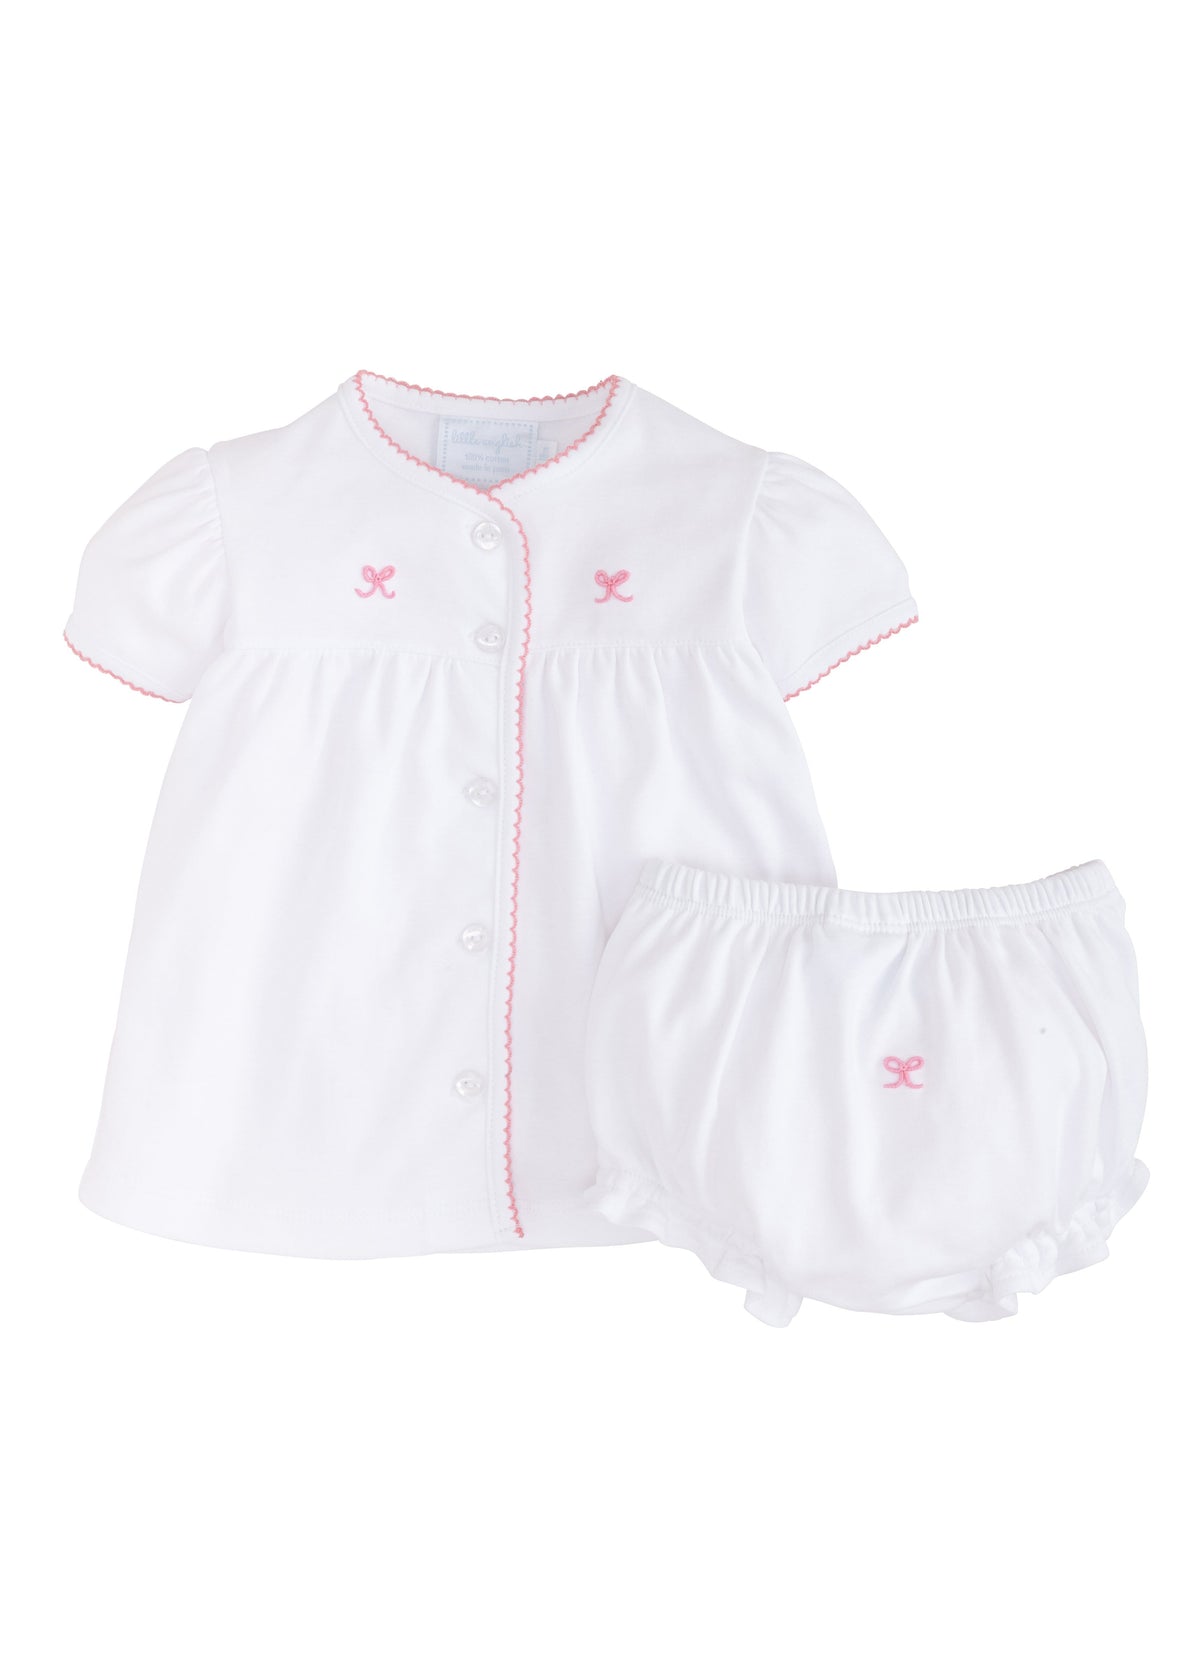 seguridadindustrialcr classic and traditional baby clothing, little girl bow two piece set